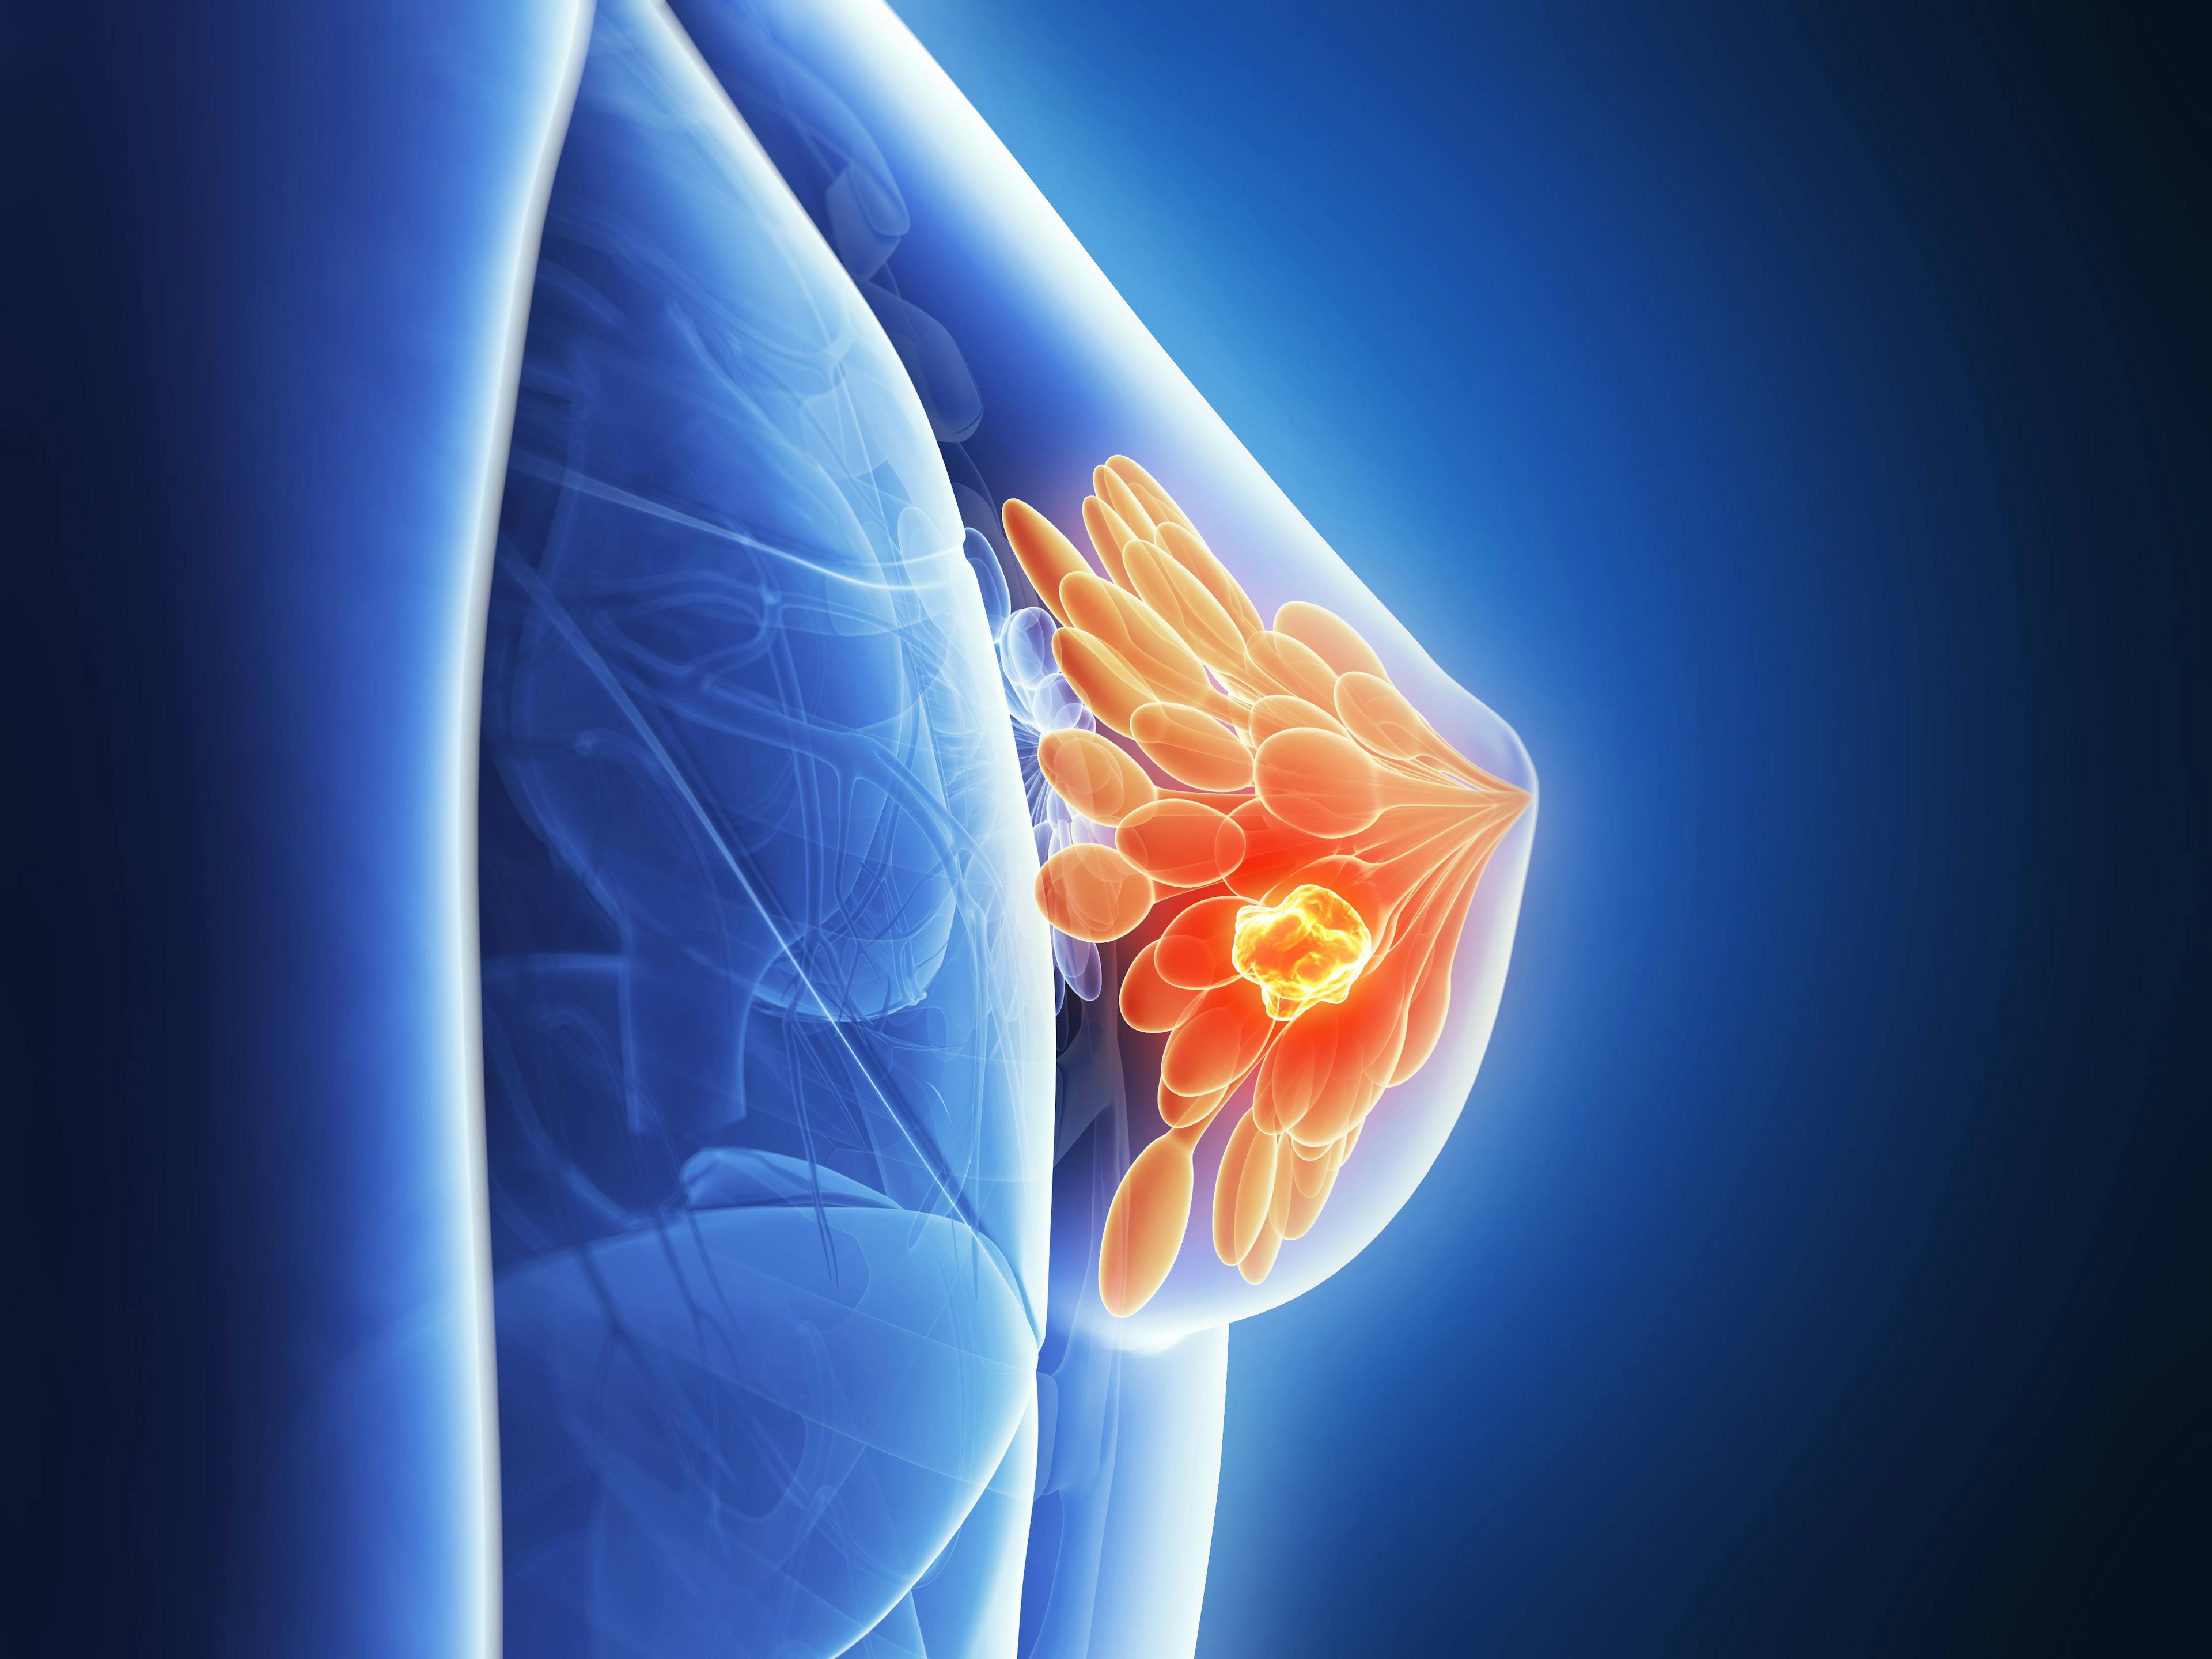 MAPK4 Presents Novel Therapeutic Target for Treatment of Triple-Negative Breast Cancer